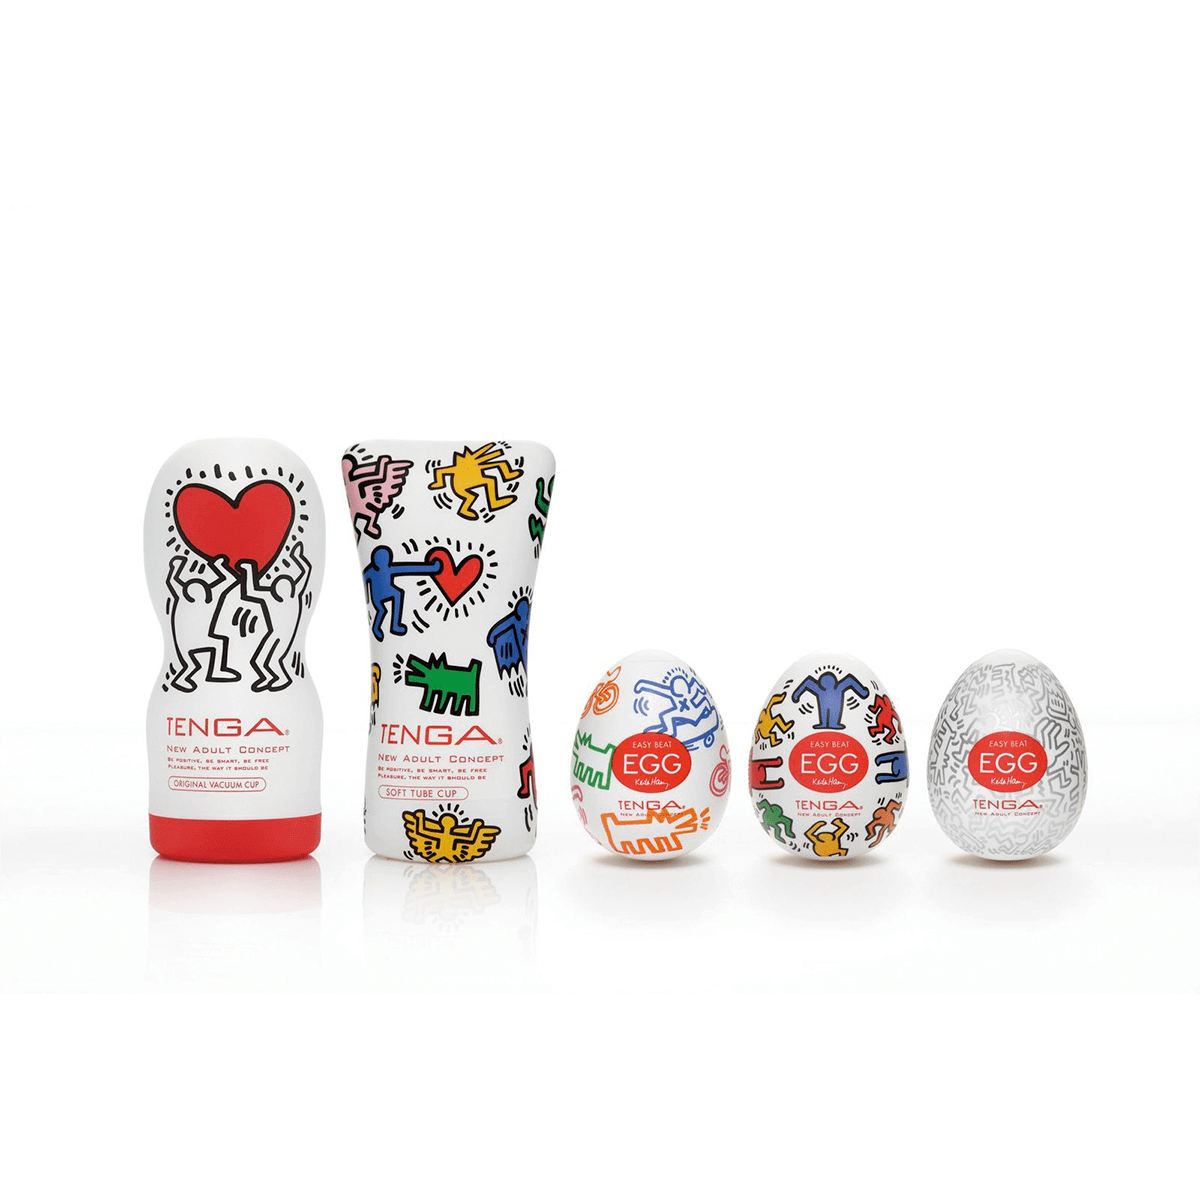 Tenga ✕ Keith Haring Egg Street - Thorn & Feather Sex Toy Canada